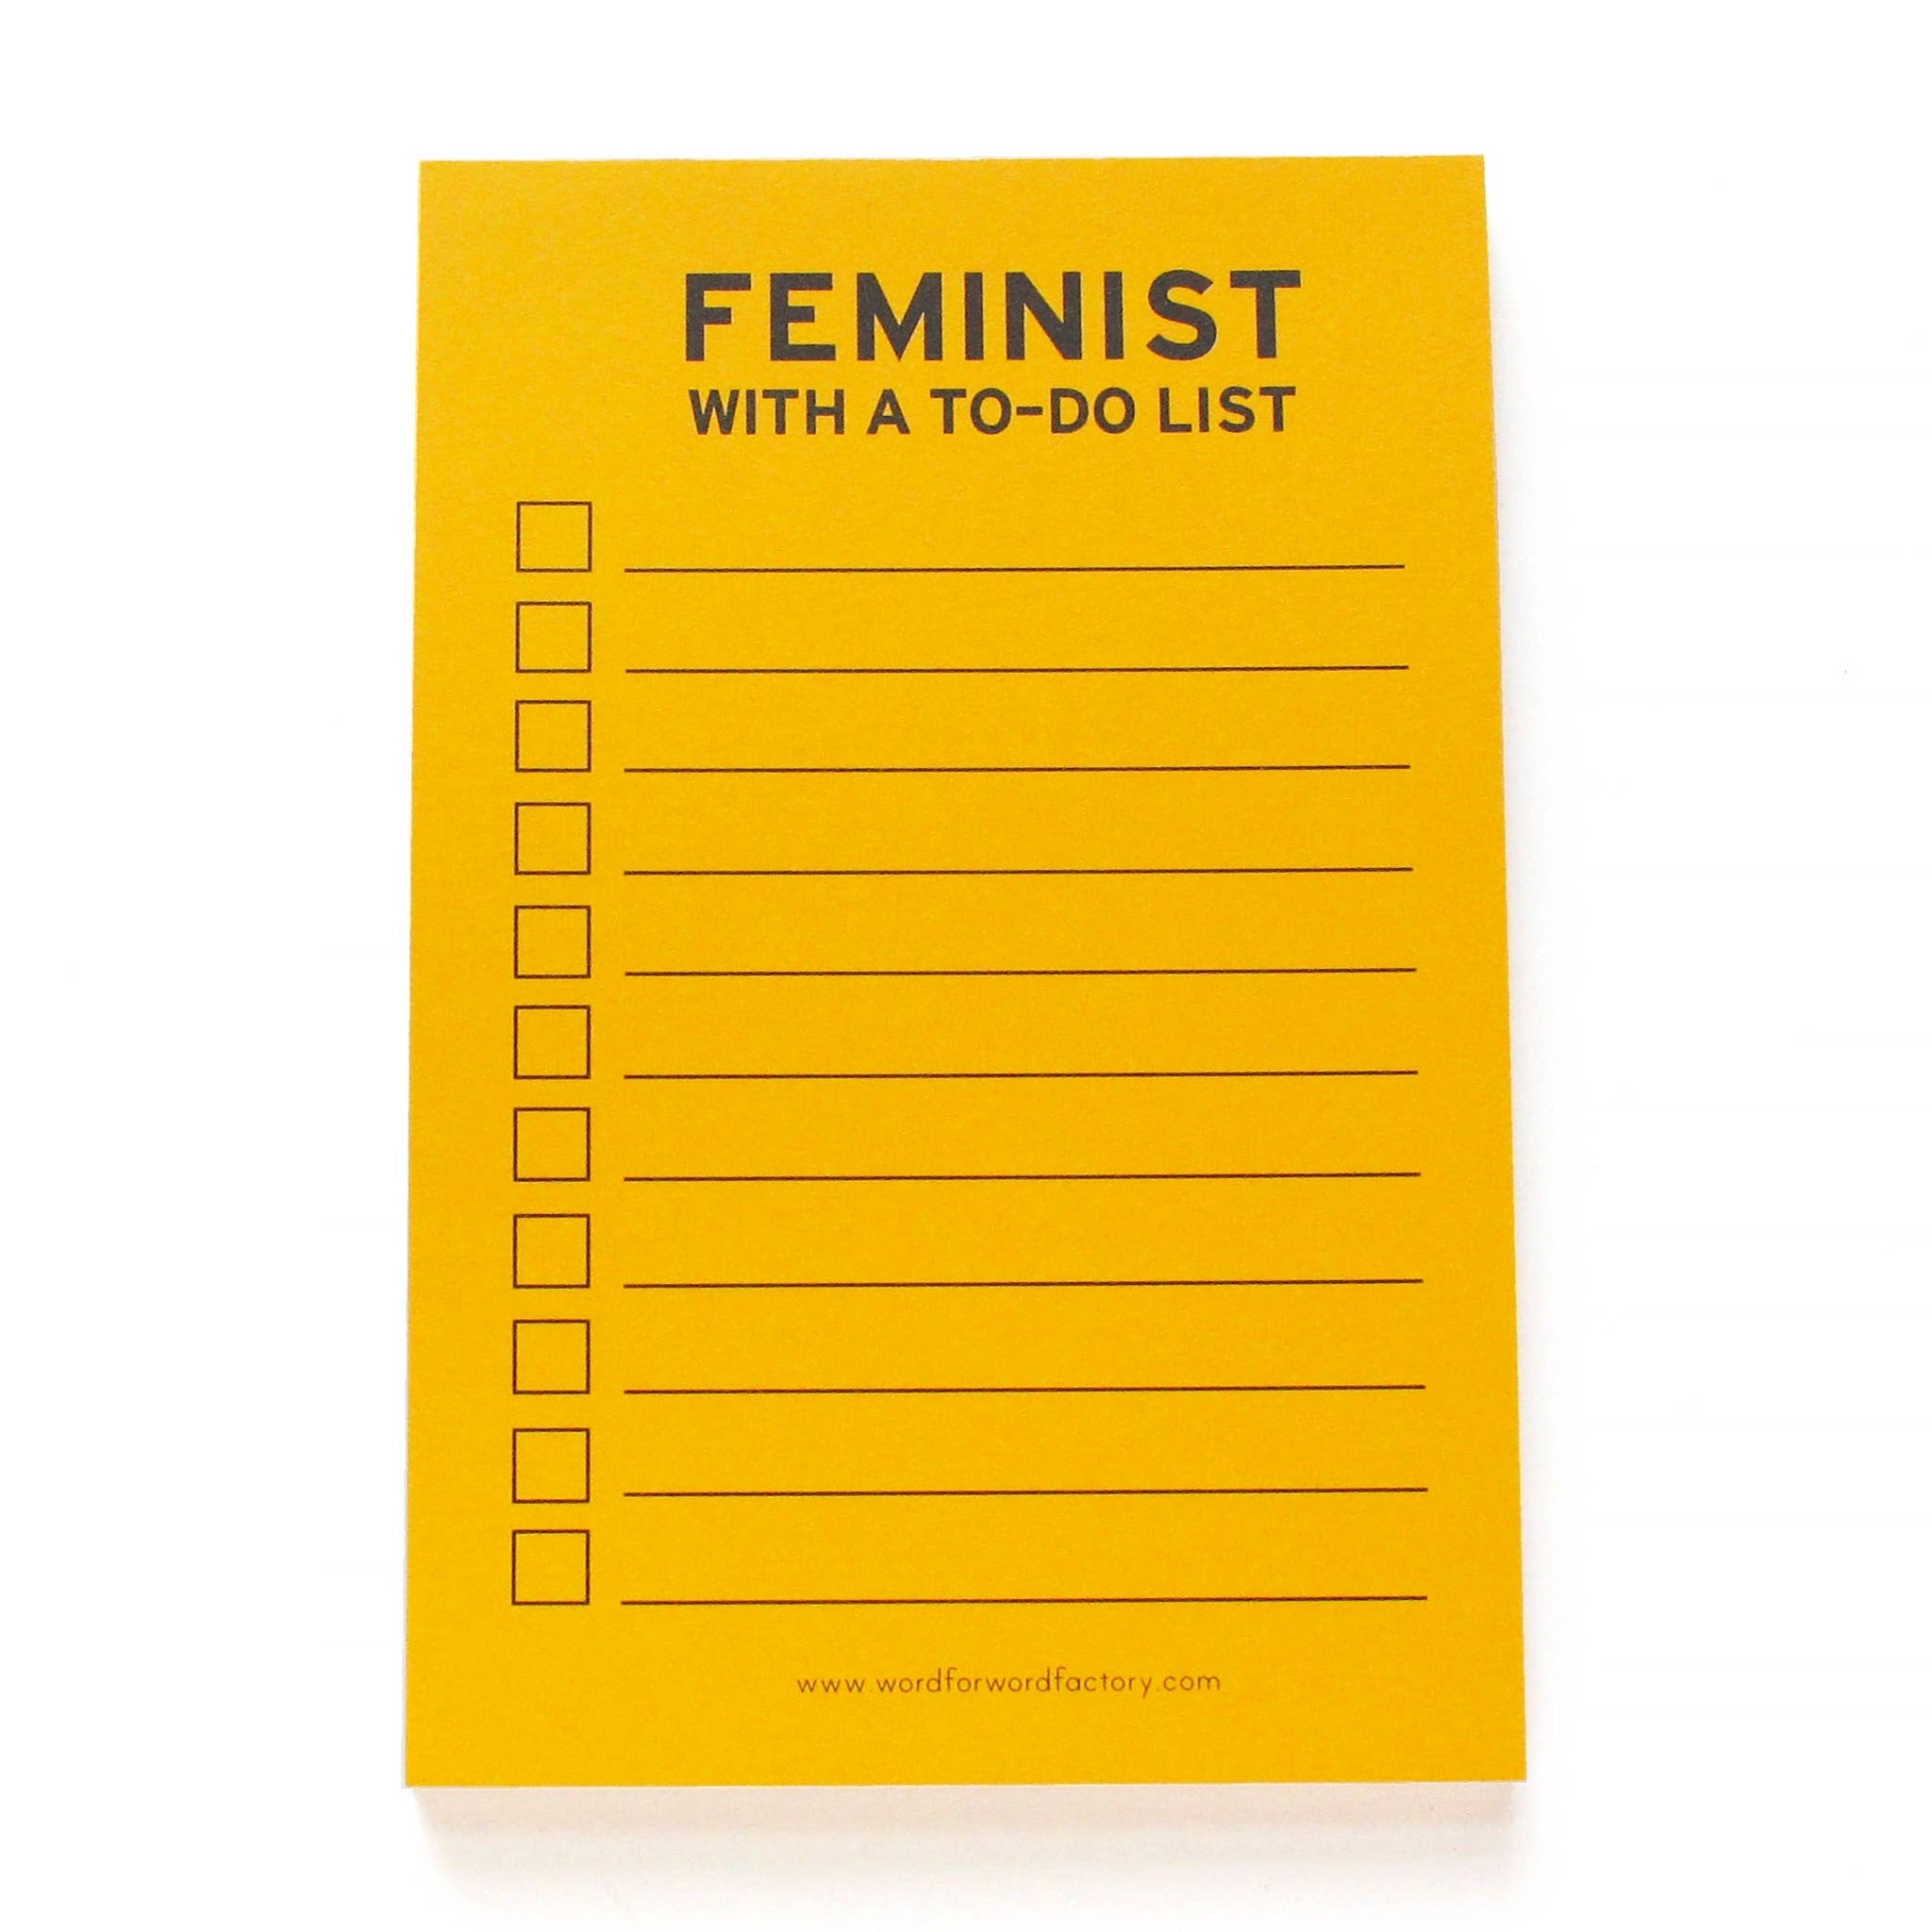 FEMINIST WITH A TO-DO LIST Notepad Checklist